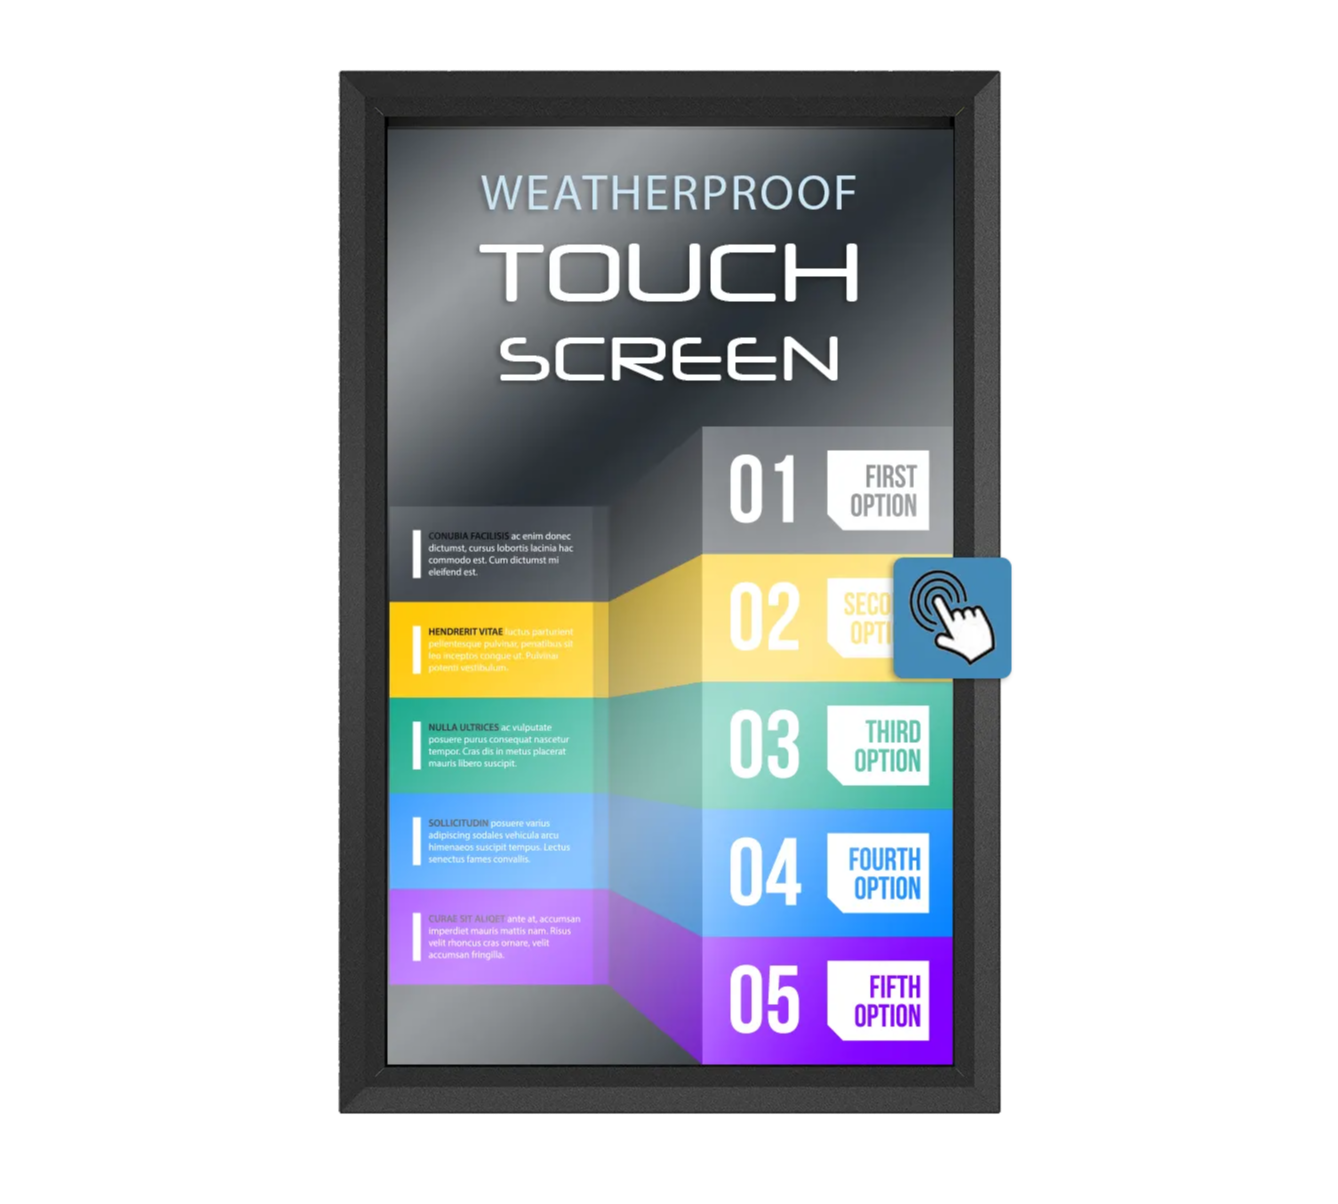 The TV Shield PRO Portrait Touch Screen Outdoor Display